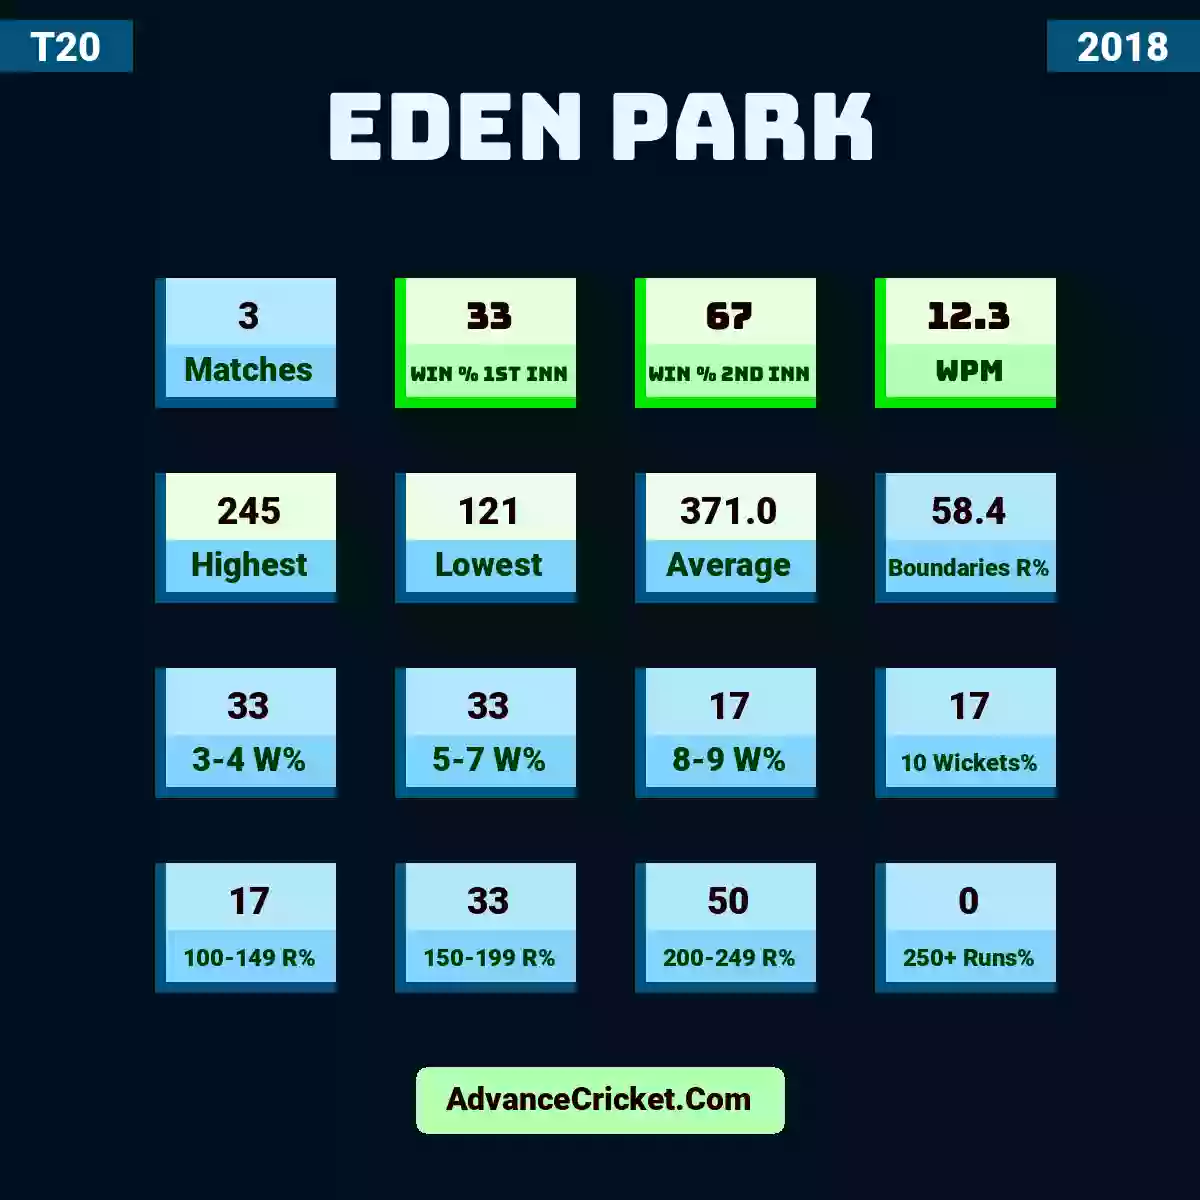 Image showing Eden Park with Matches: 3, Win % 1st Inn: 33, Win % 2nd Inn: 67, WPM: 12.3, Highest: 245, Lowest: 121, Average: 371.0, Boundaries R%: 58.4, 3-4 W%: 33, 5-7 W%: 33, 8-9 W%: 17, 10 Wickets%: 17, 100-149 R%: 17, 150-199 R%: 33, 200-249 R%: 50, 250+ Runs%: 0.